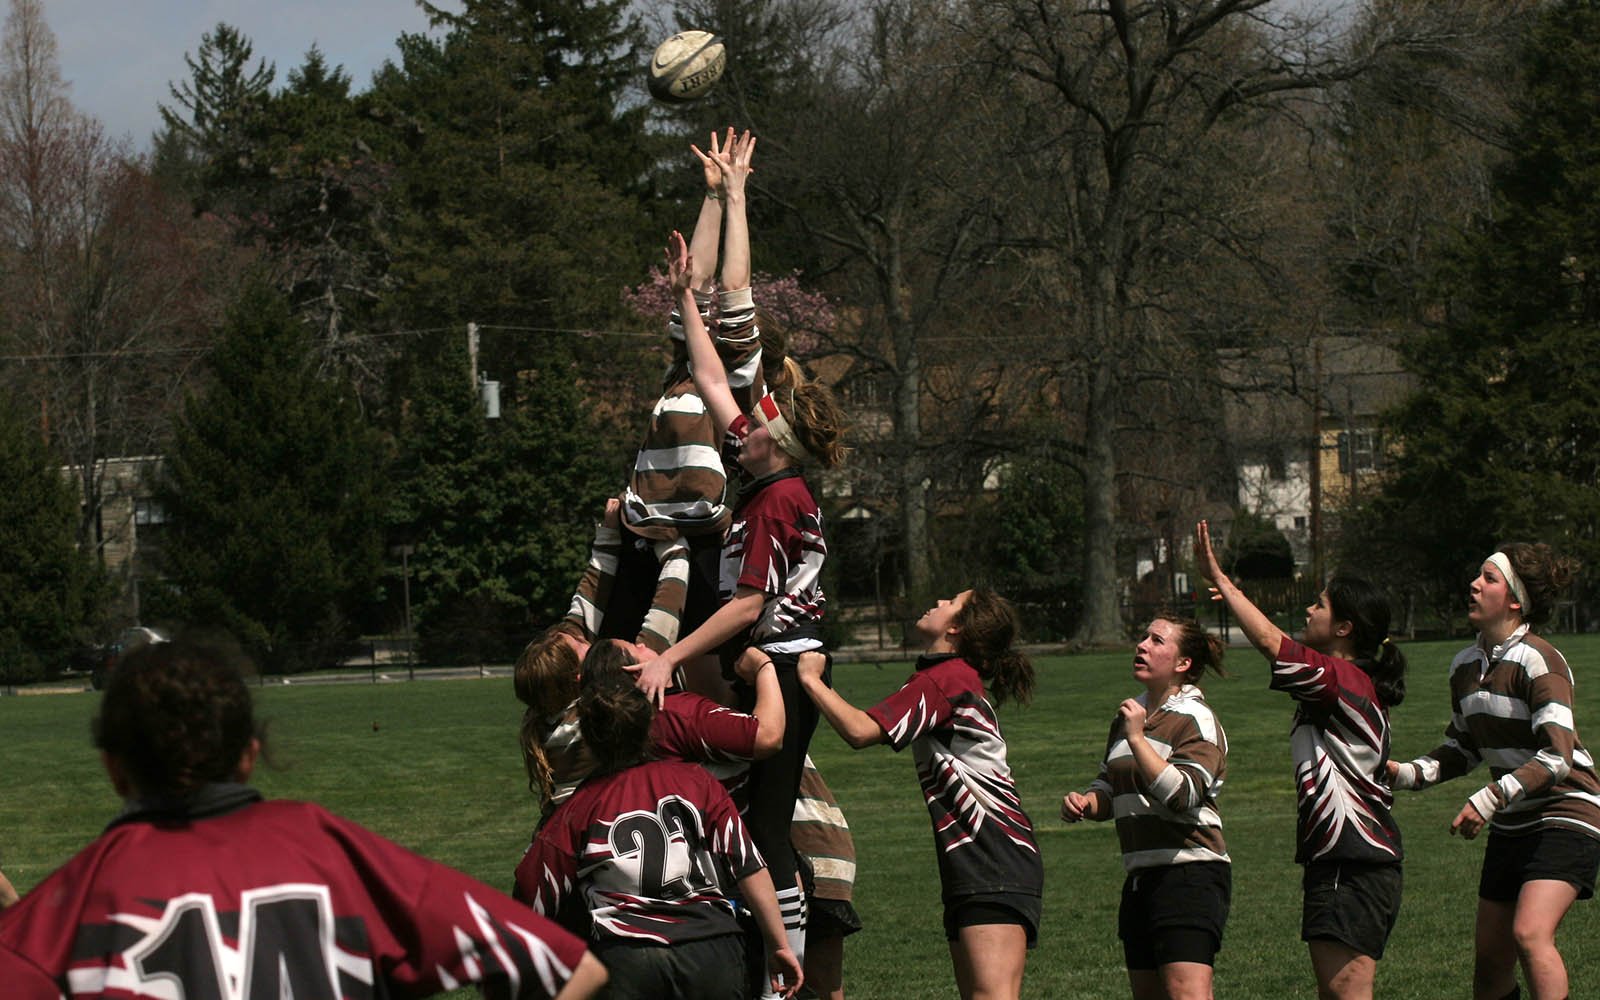 female students in a rugby match